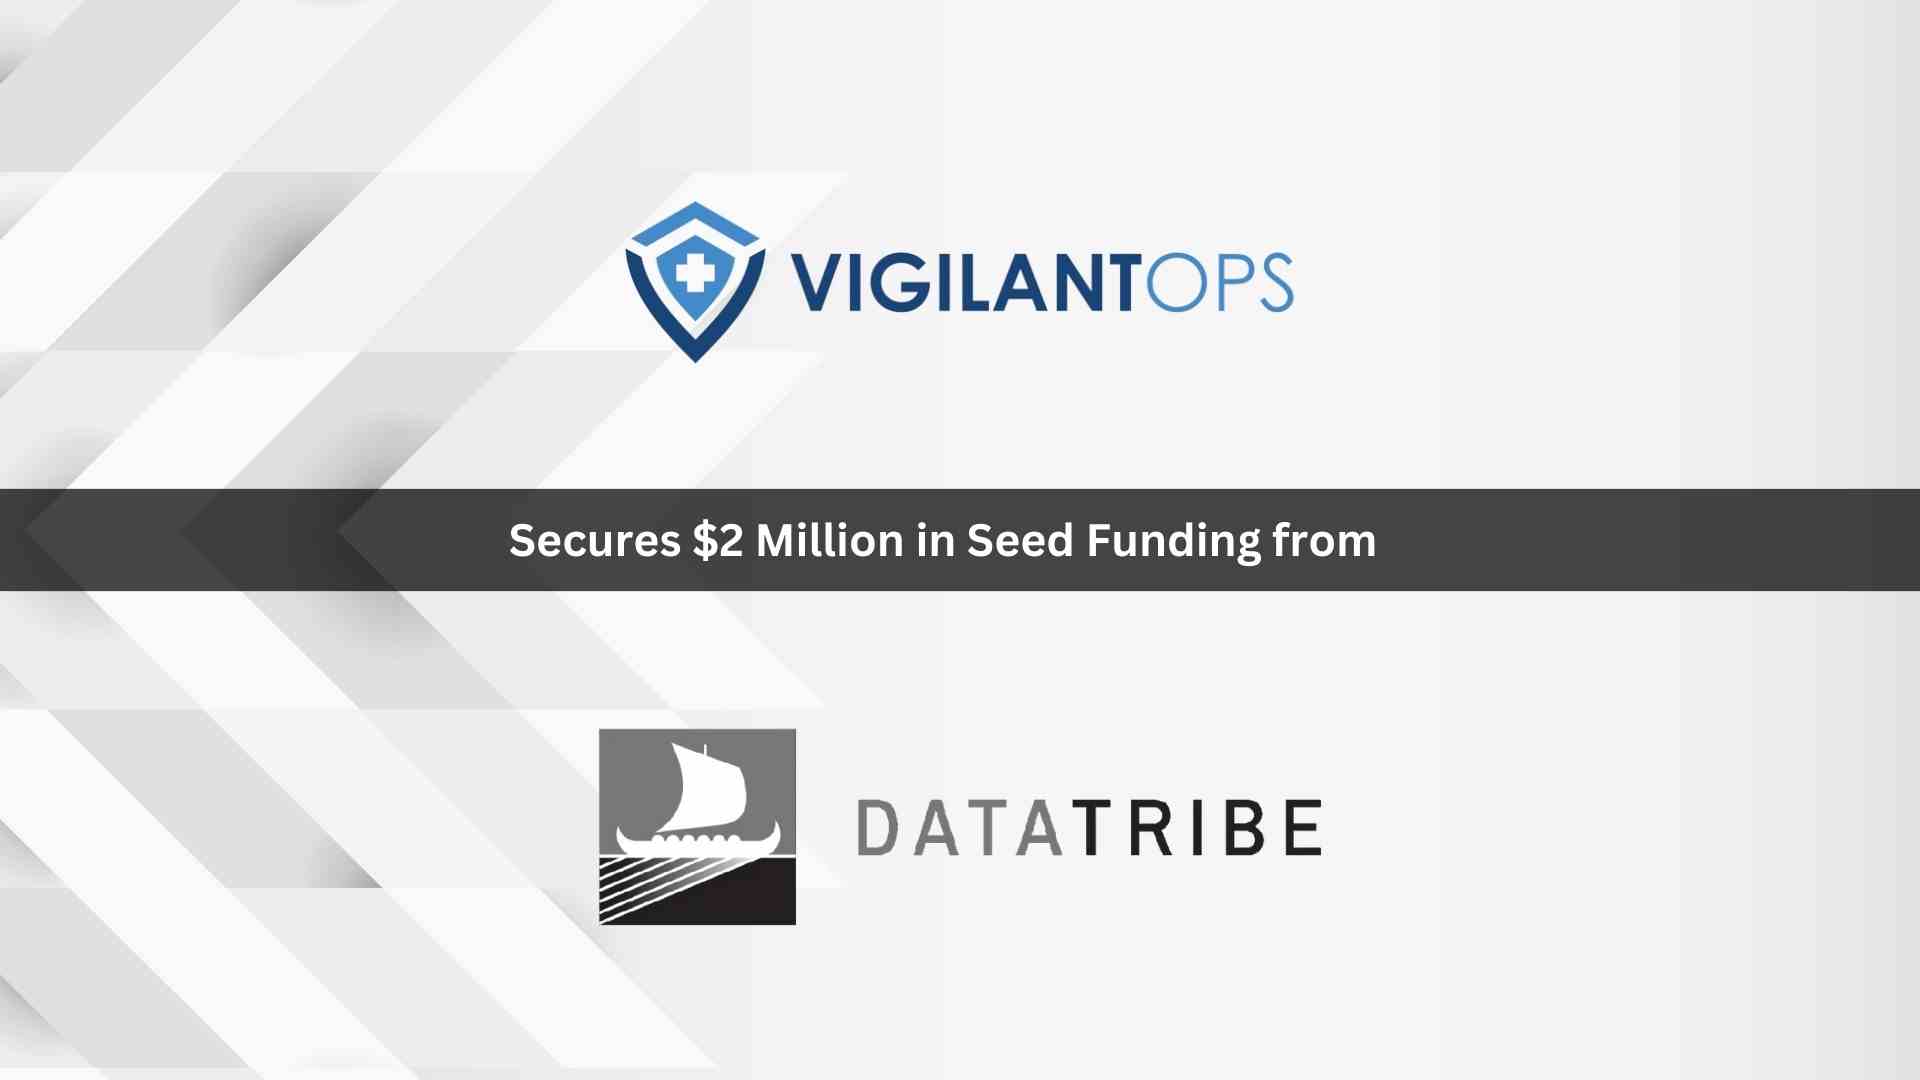 SBOM Automation Platform Vigilant Ops Secures $2 Million in Seed Funding from DataTribe